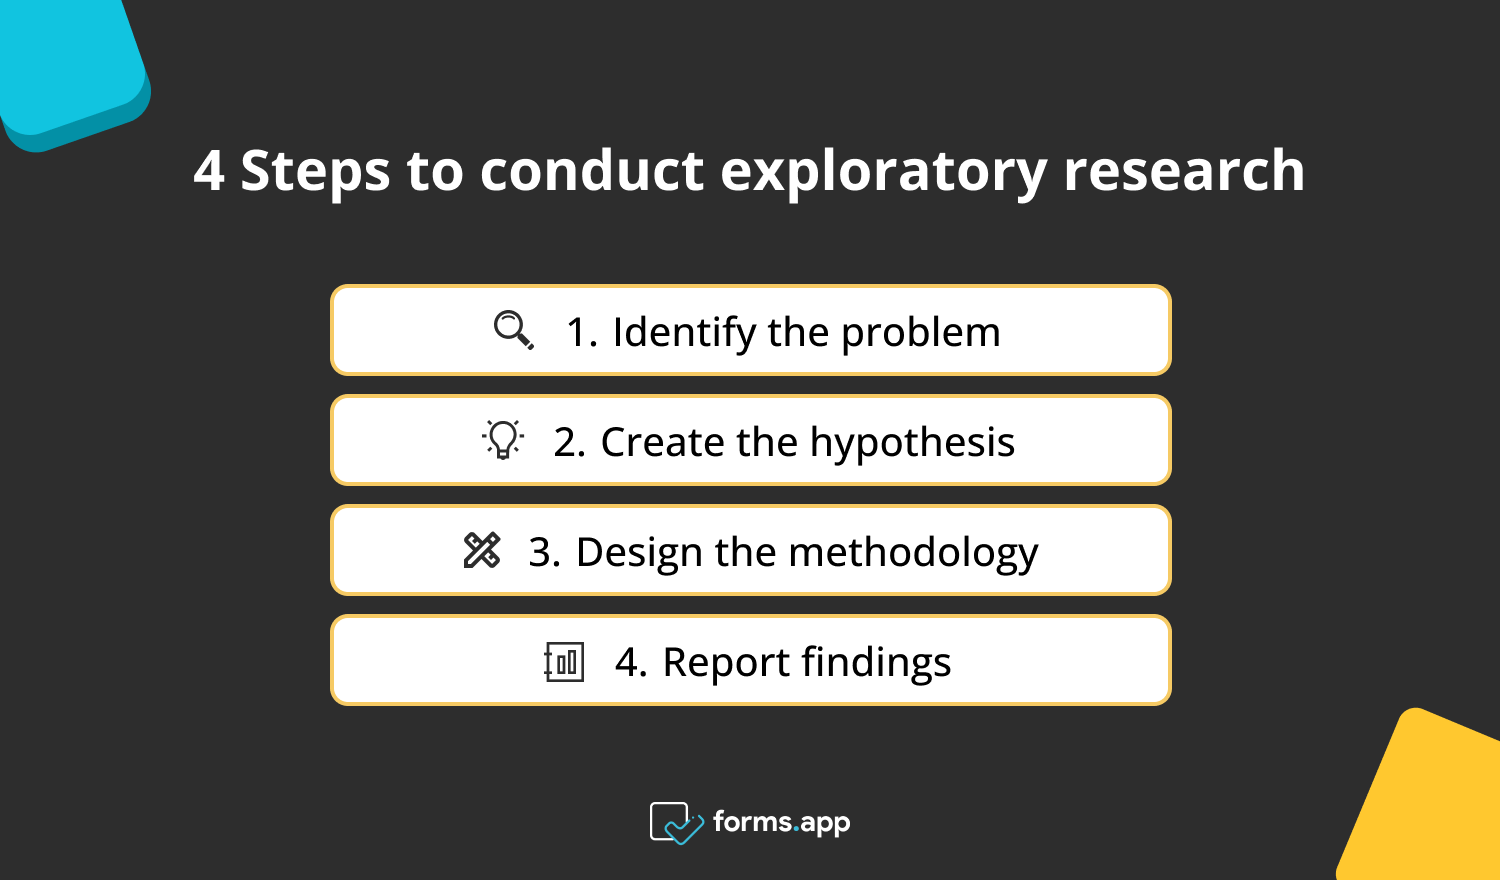 Essential steps to conduct exploratory research